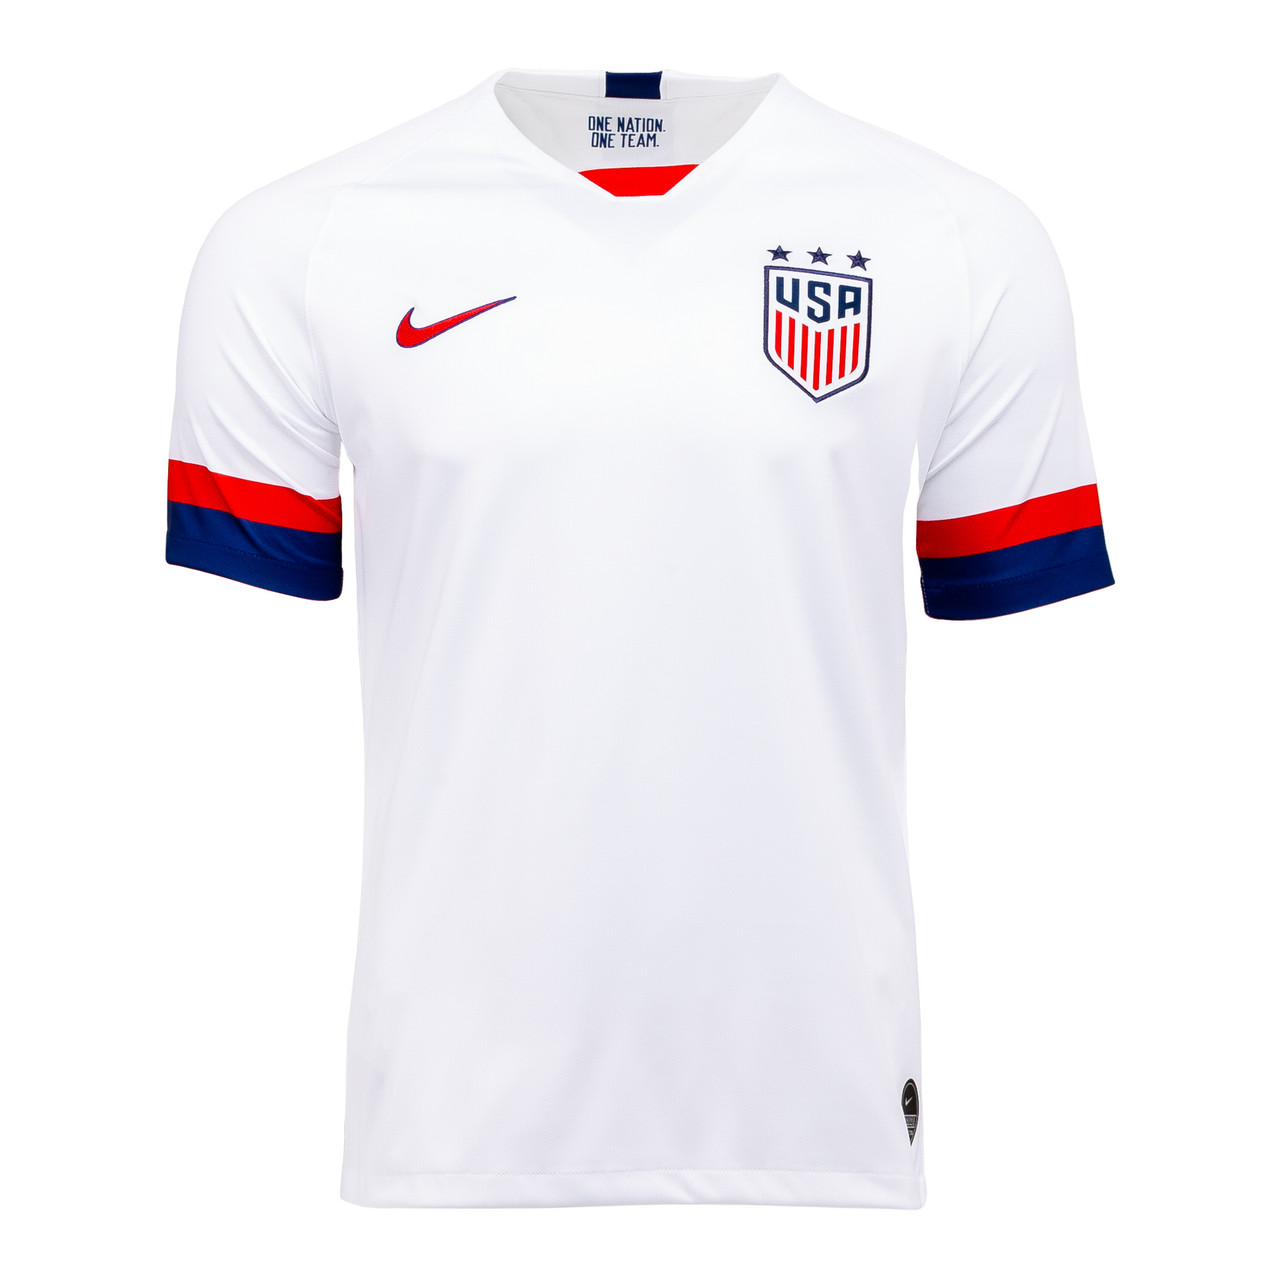 NIKE USWNT Mens Home Jersey 2019 white 